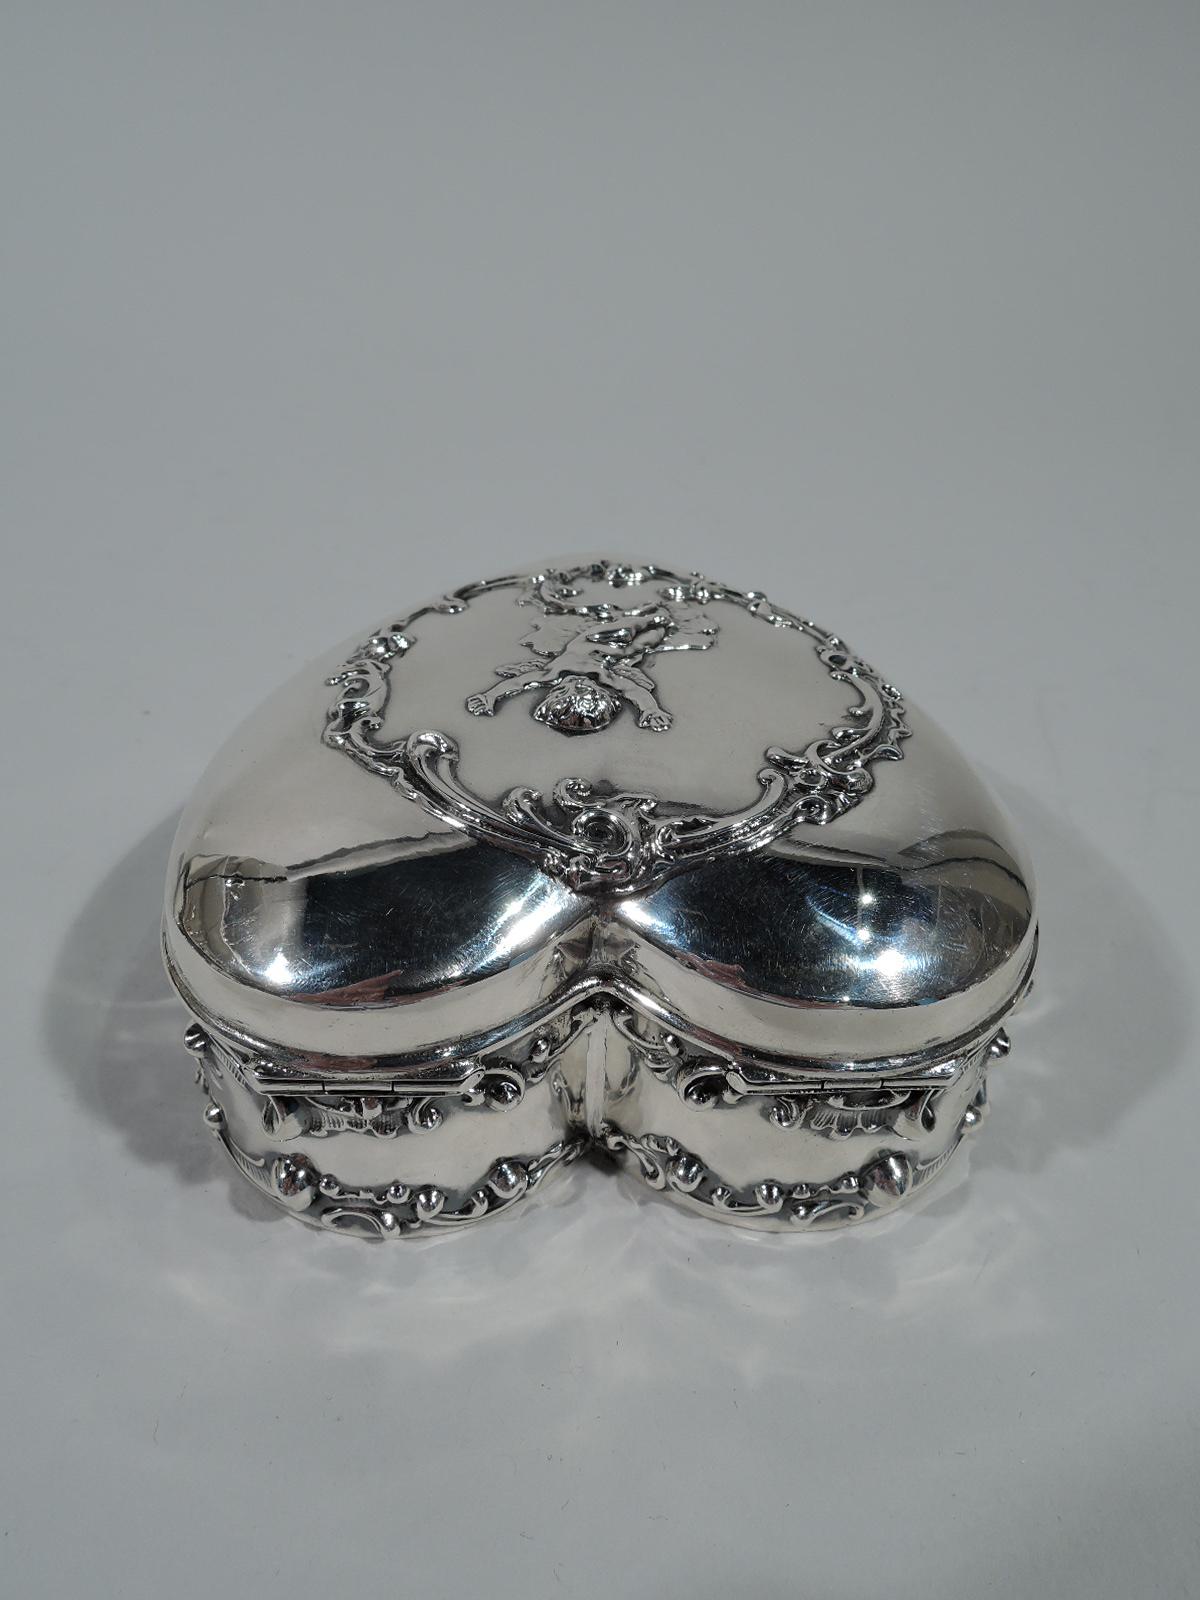 Romantic heart-form sterling silver jewelry box. Straight sides and hinged and raised cover. Applied ornament. Sides have scrolls and cover has gleeful arms-raised-high cupid in scrolled wreath. Box interior velvet lined. Cover interior gilt-washed.